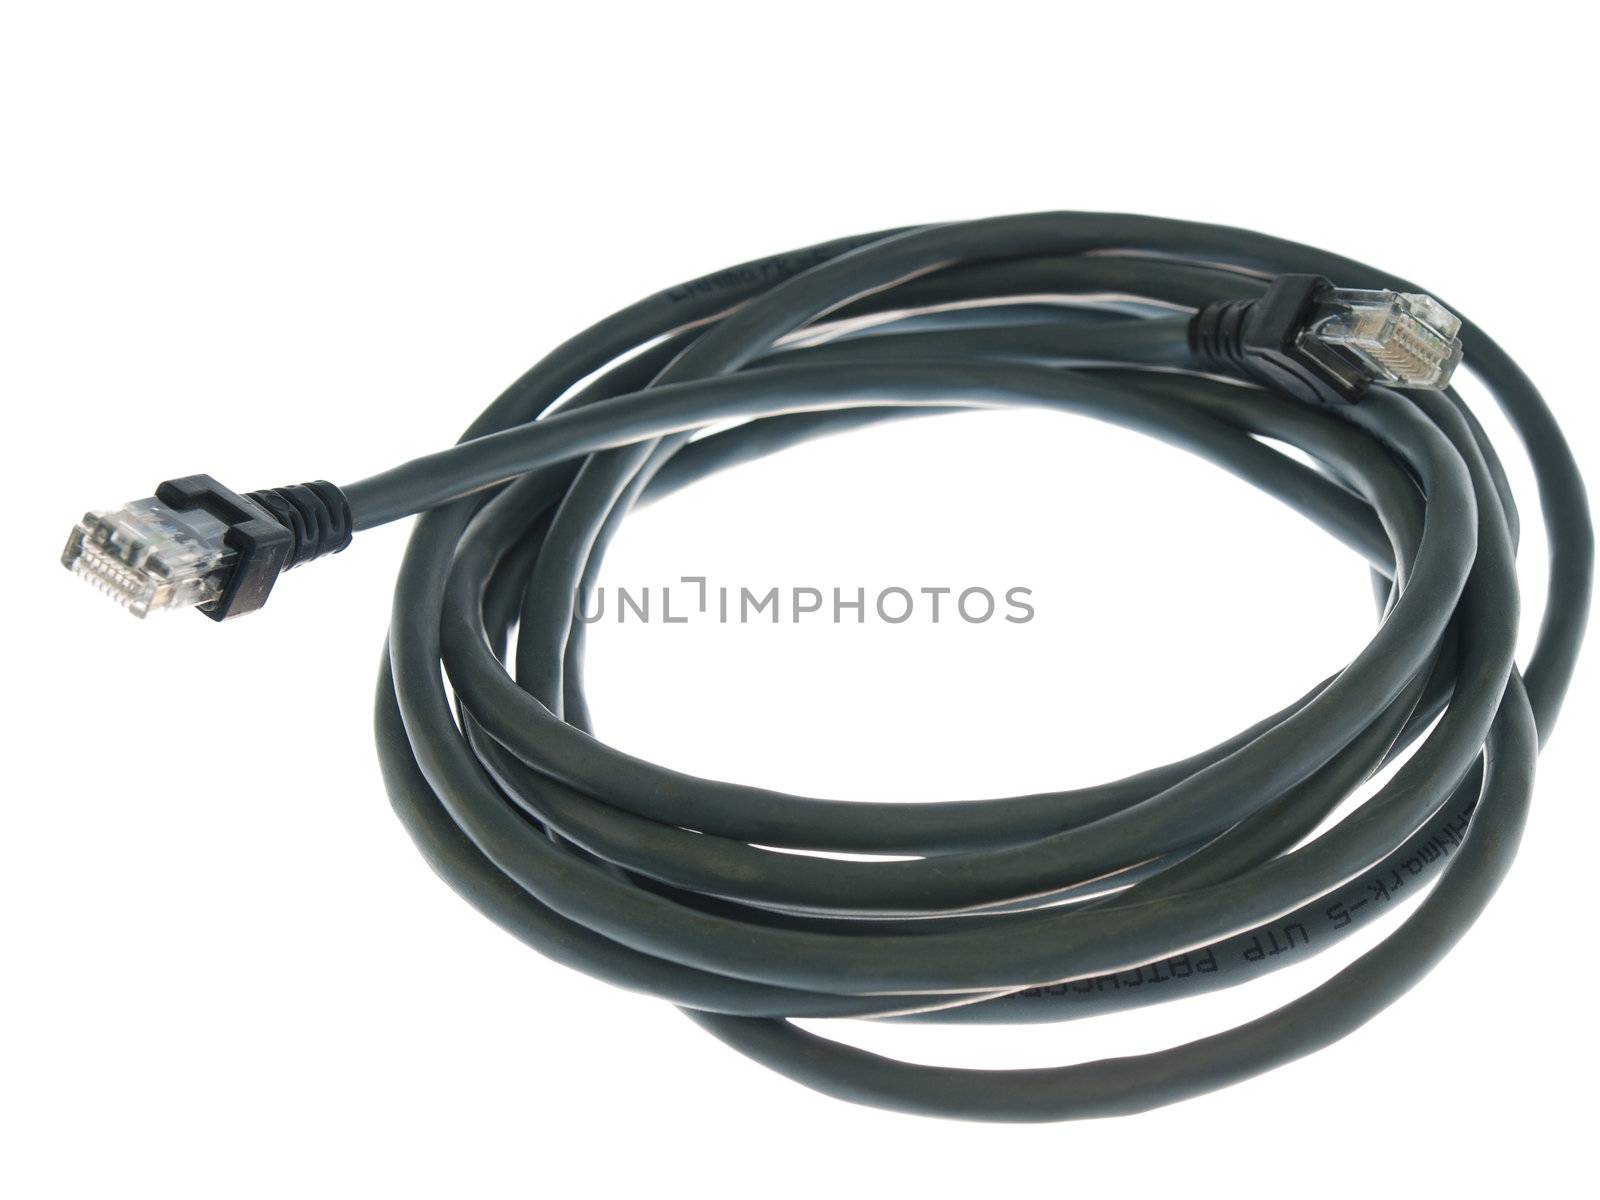 a roll utp cable on a white background